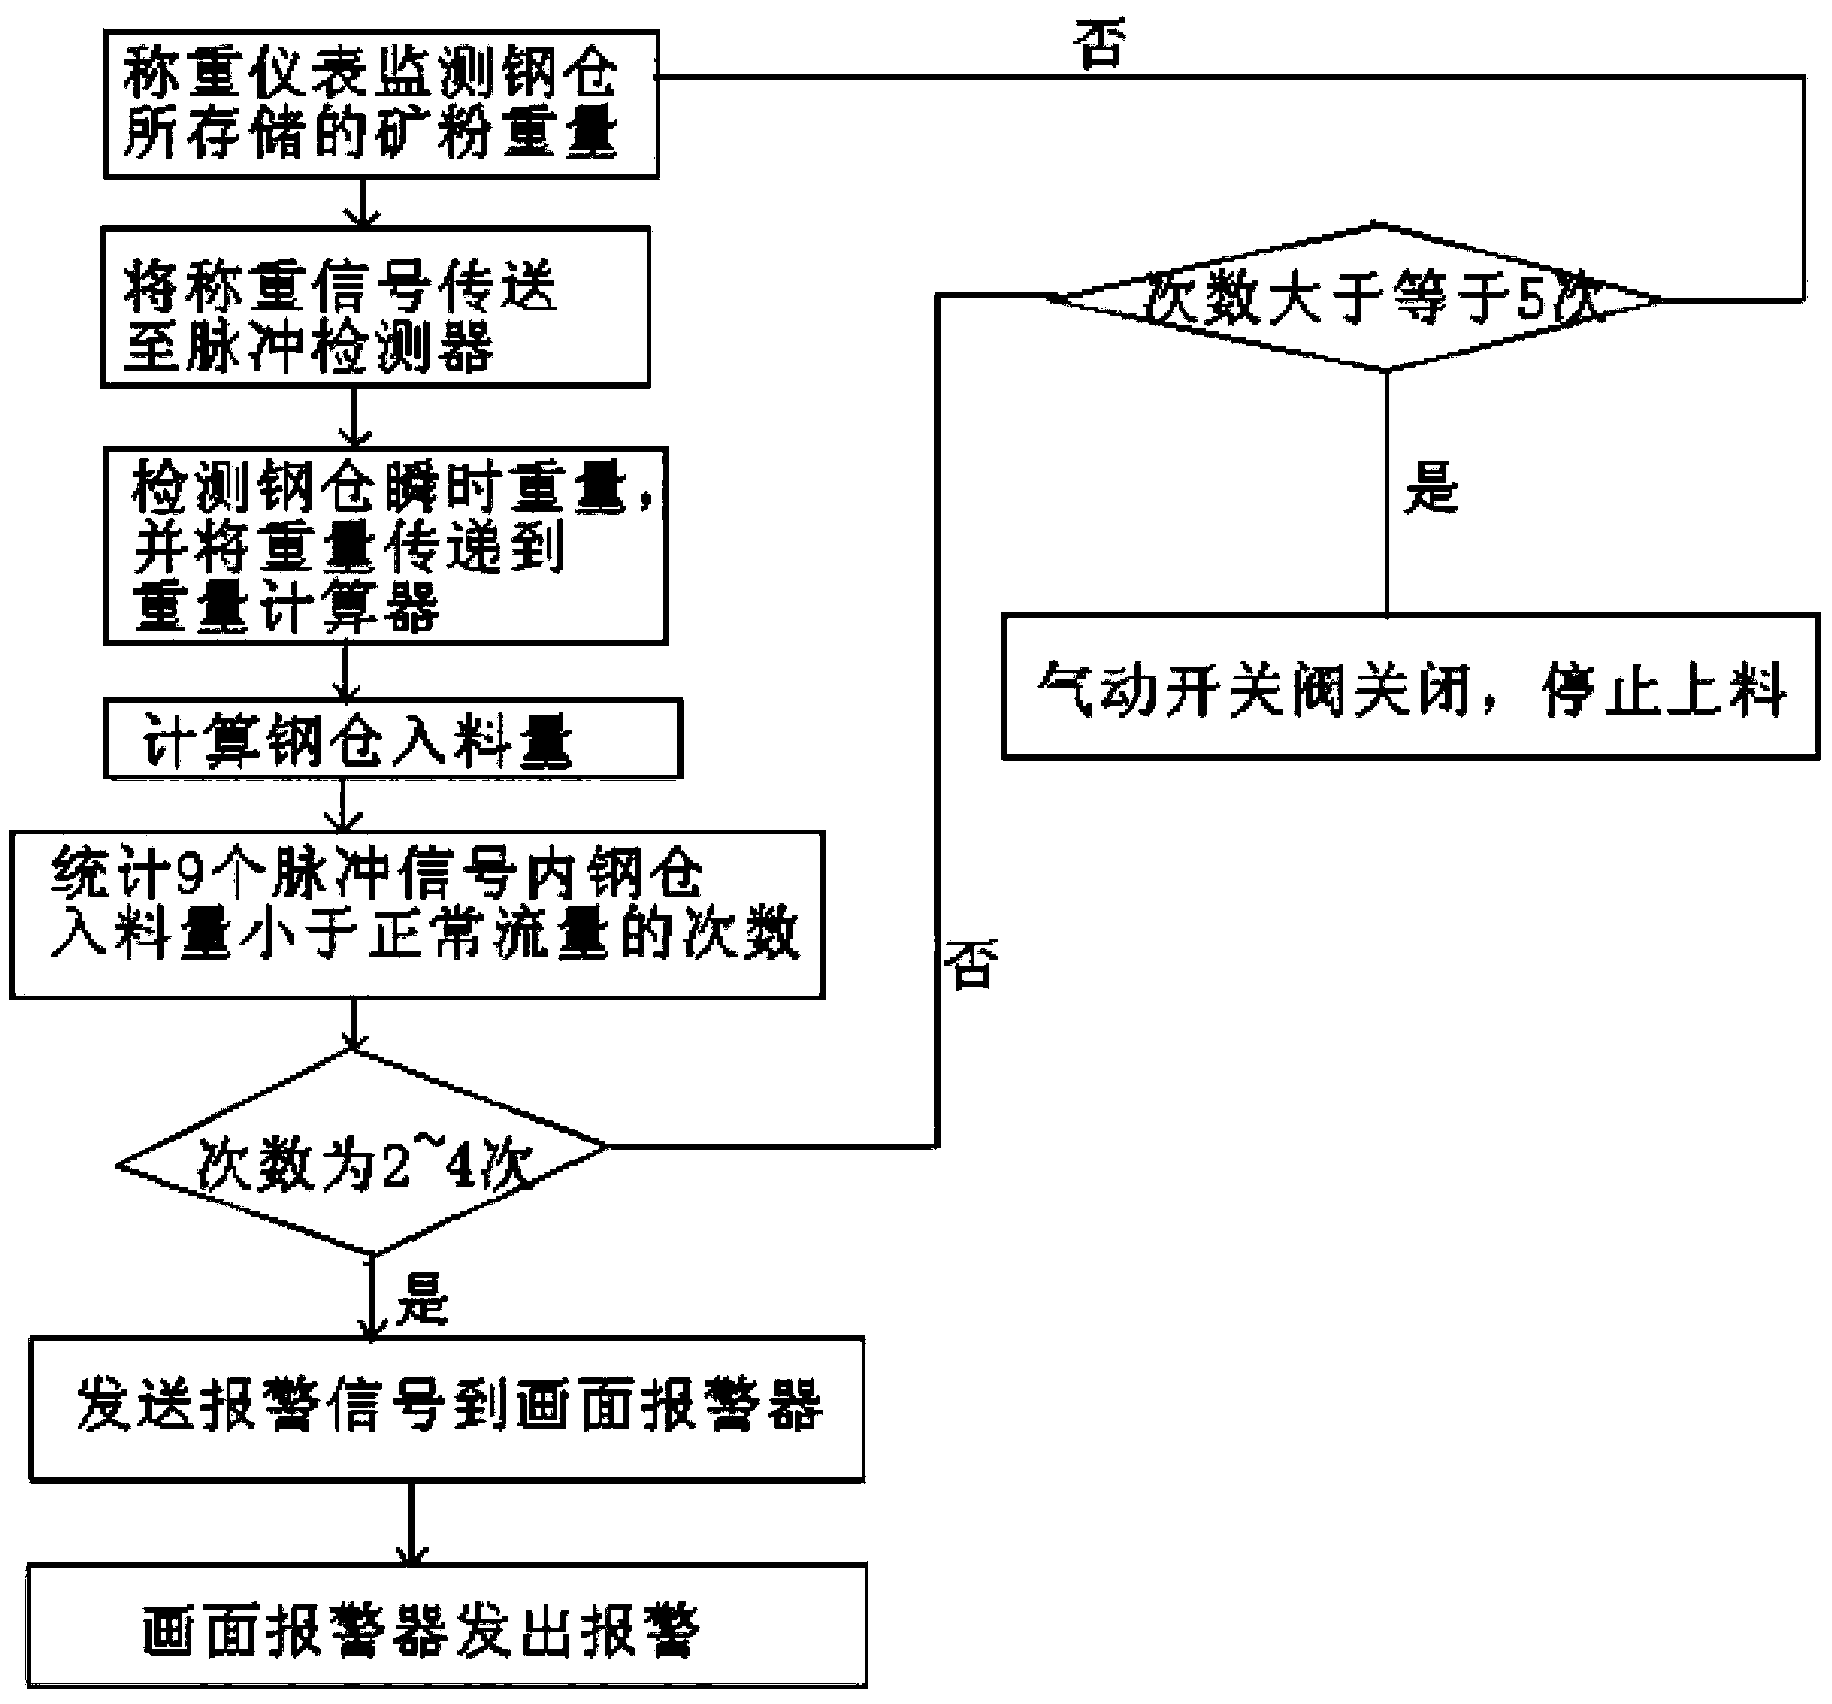 Wharf steel silo loading flow monitoring system and method